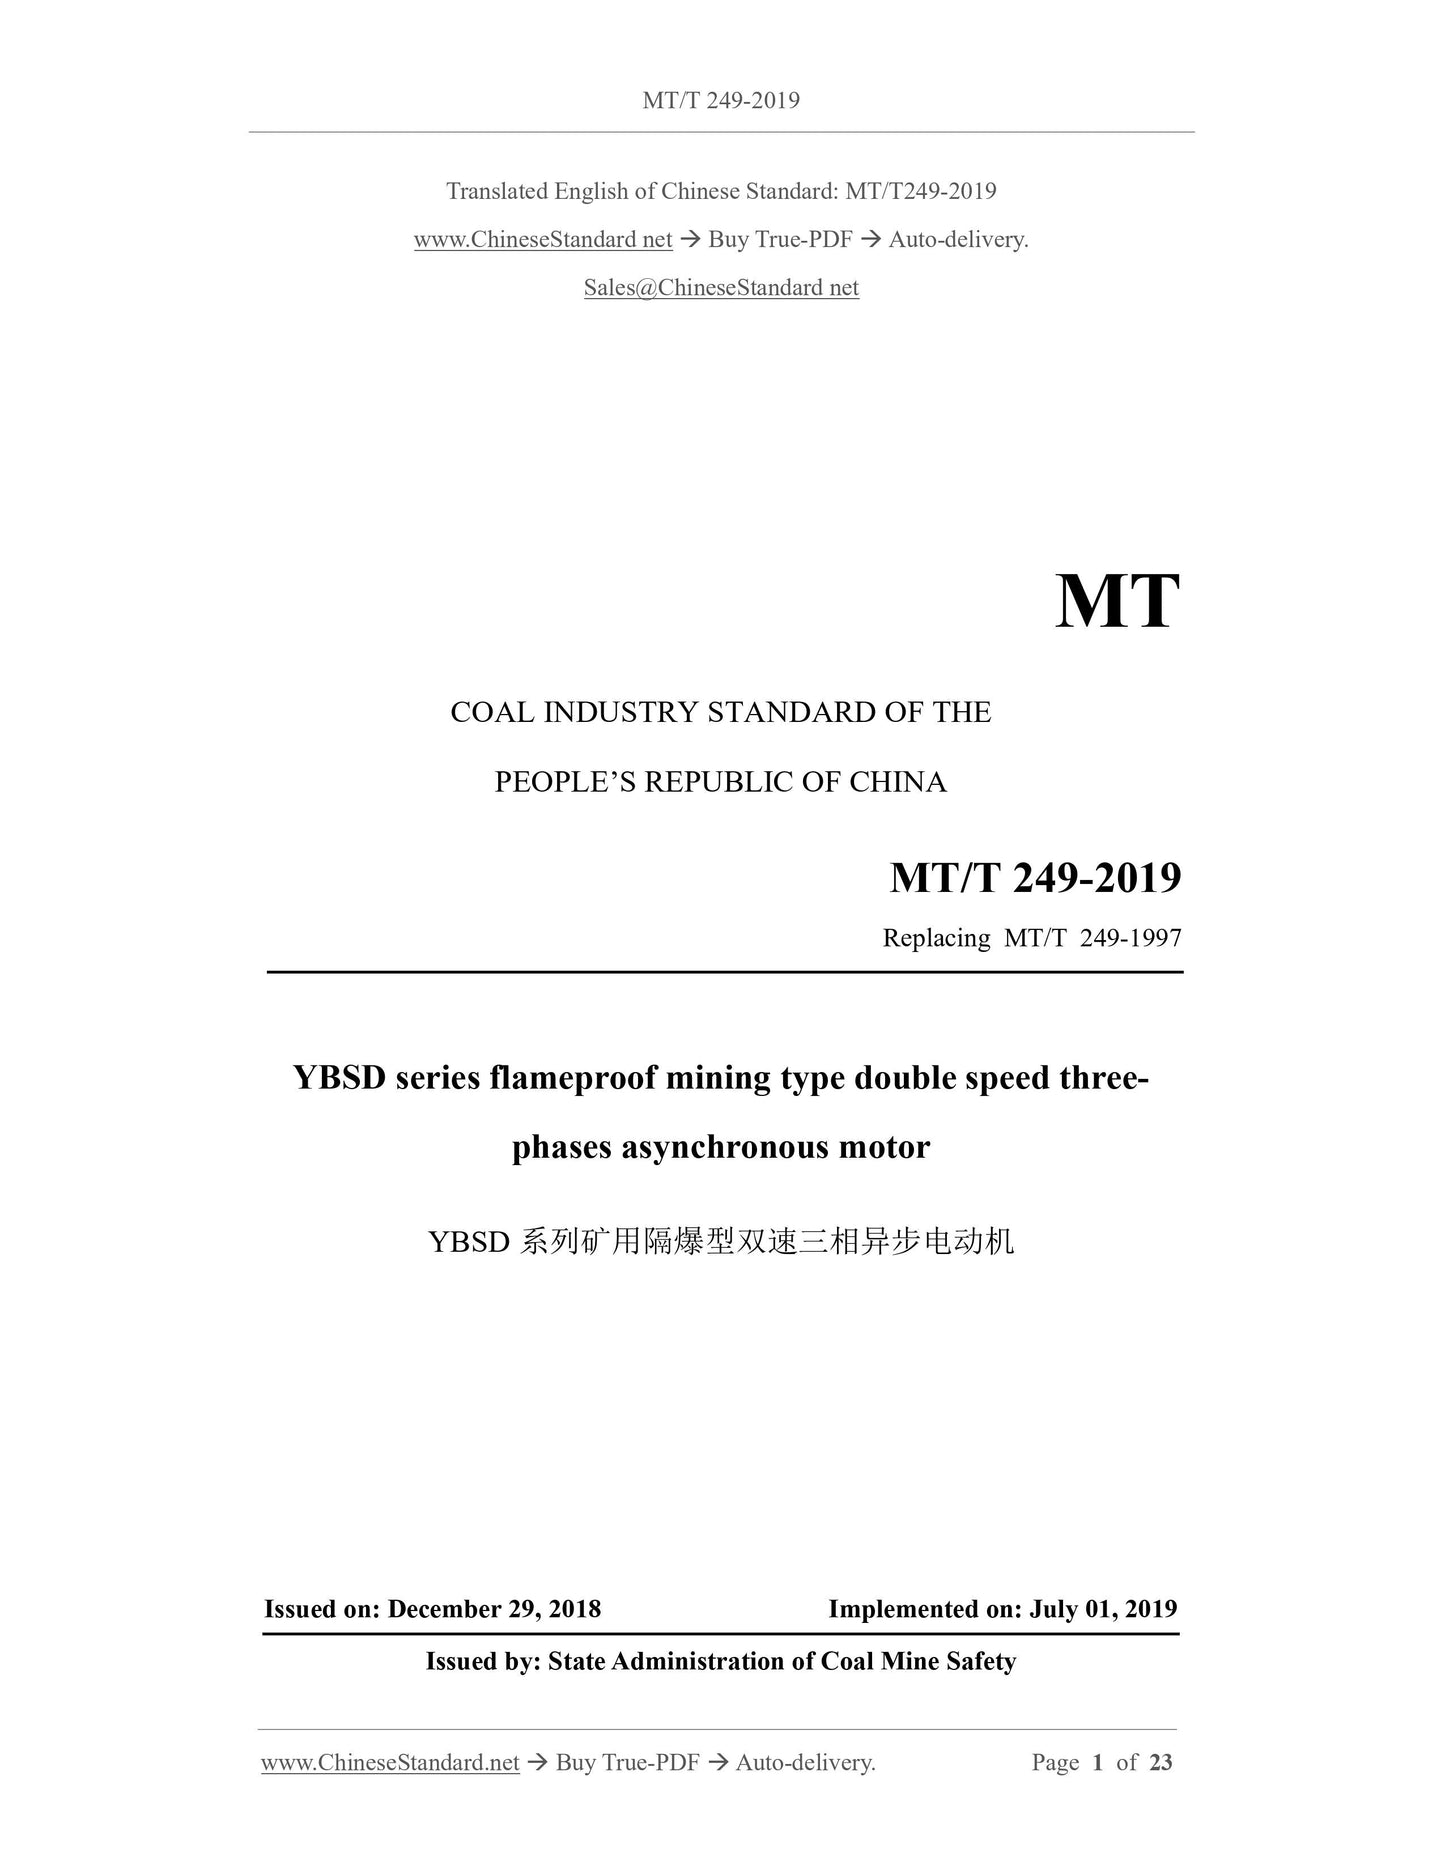 MT/T 249-2019 Page 1